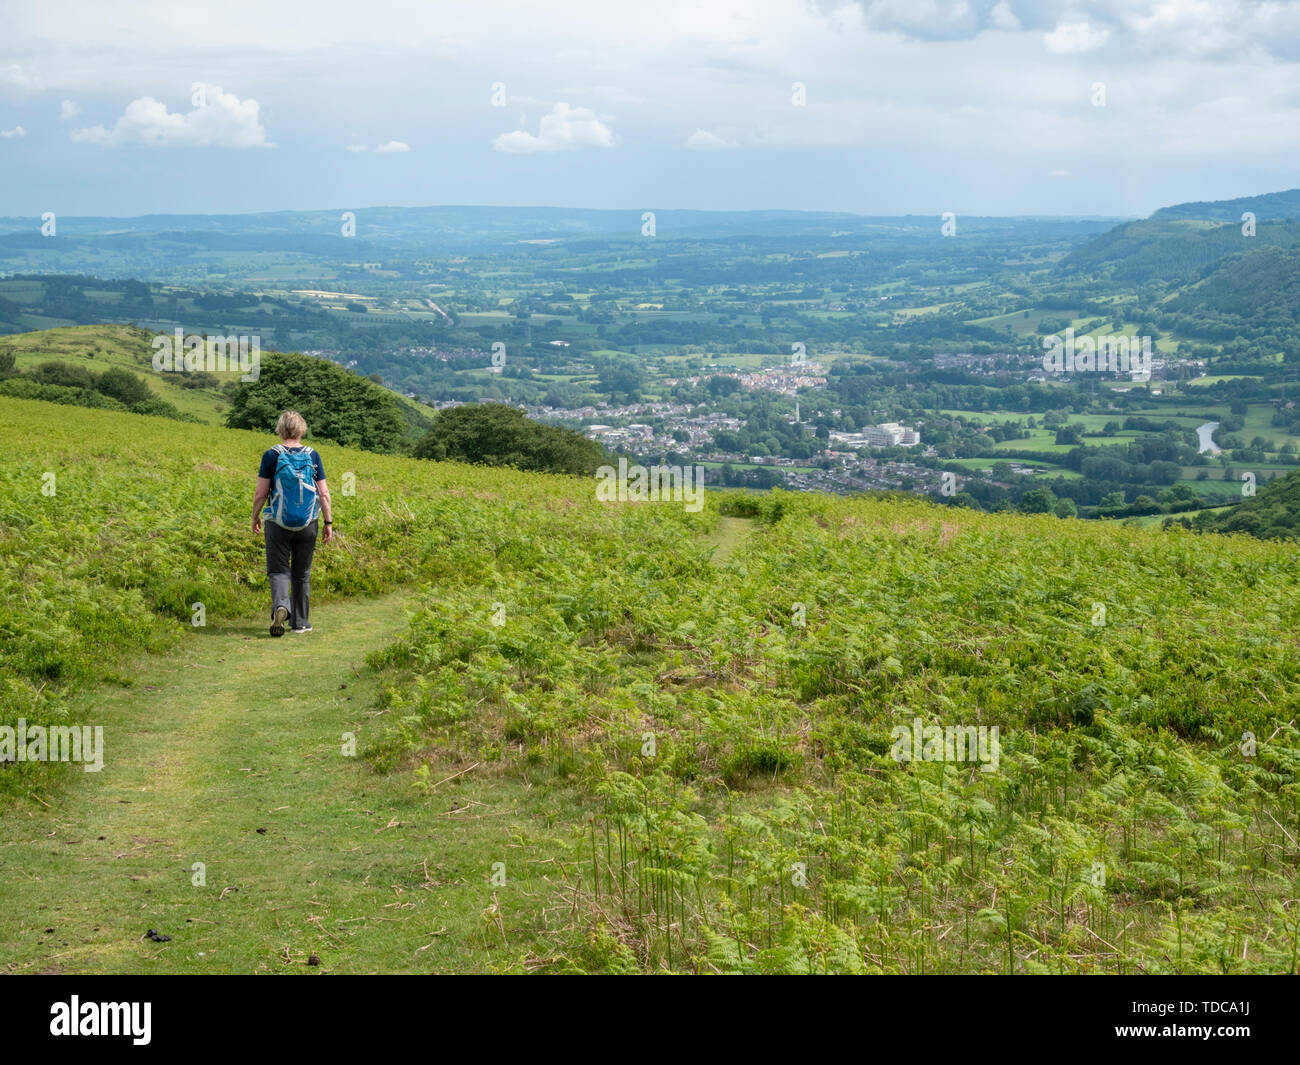 A woman walking in the hills near Abergavenny and Sugar Loaf Mountain in the brecon Beacons Wales UK Stock Photo